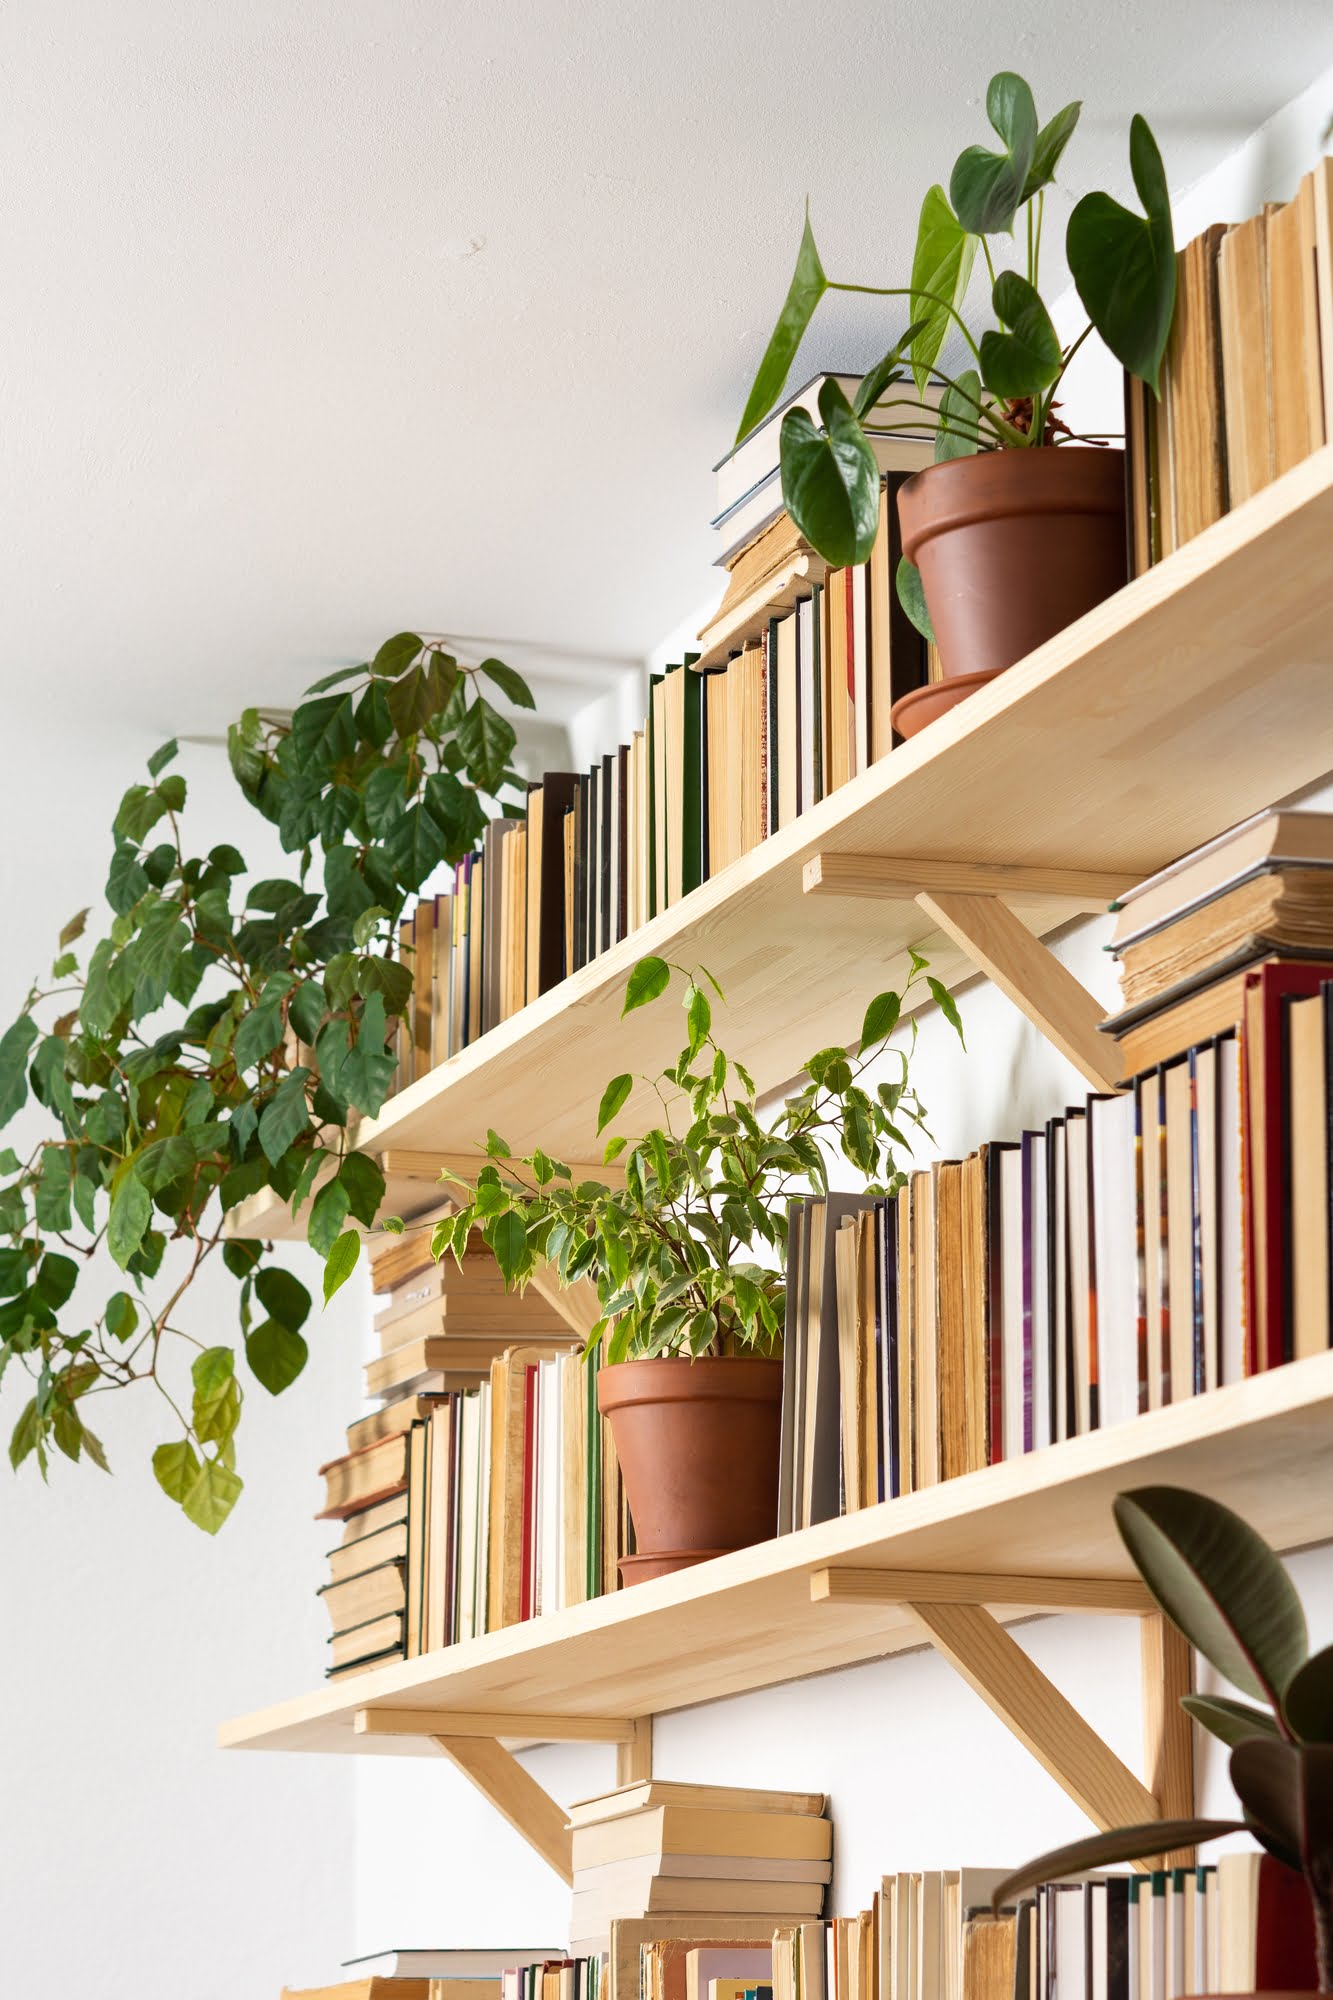 How To Decorate Bookshelves With Plants 30 Ideas Collection A Day